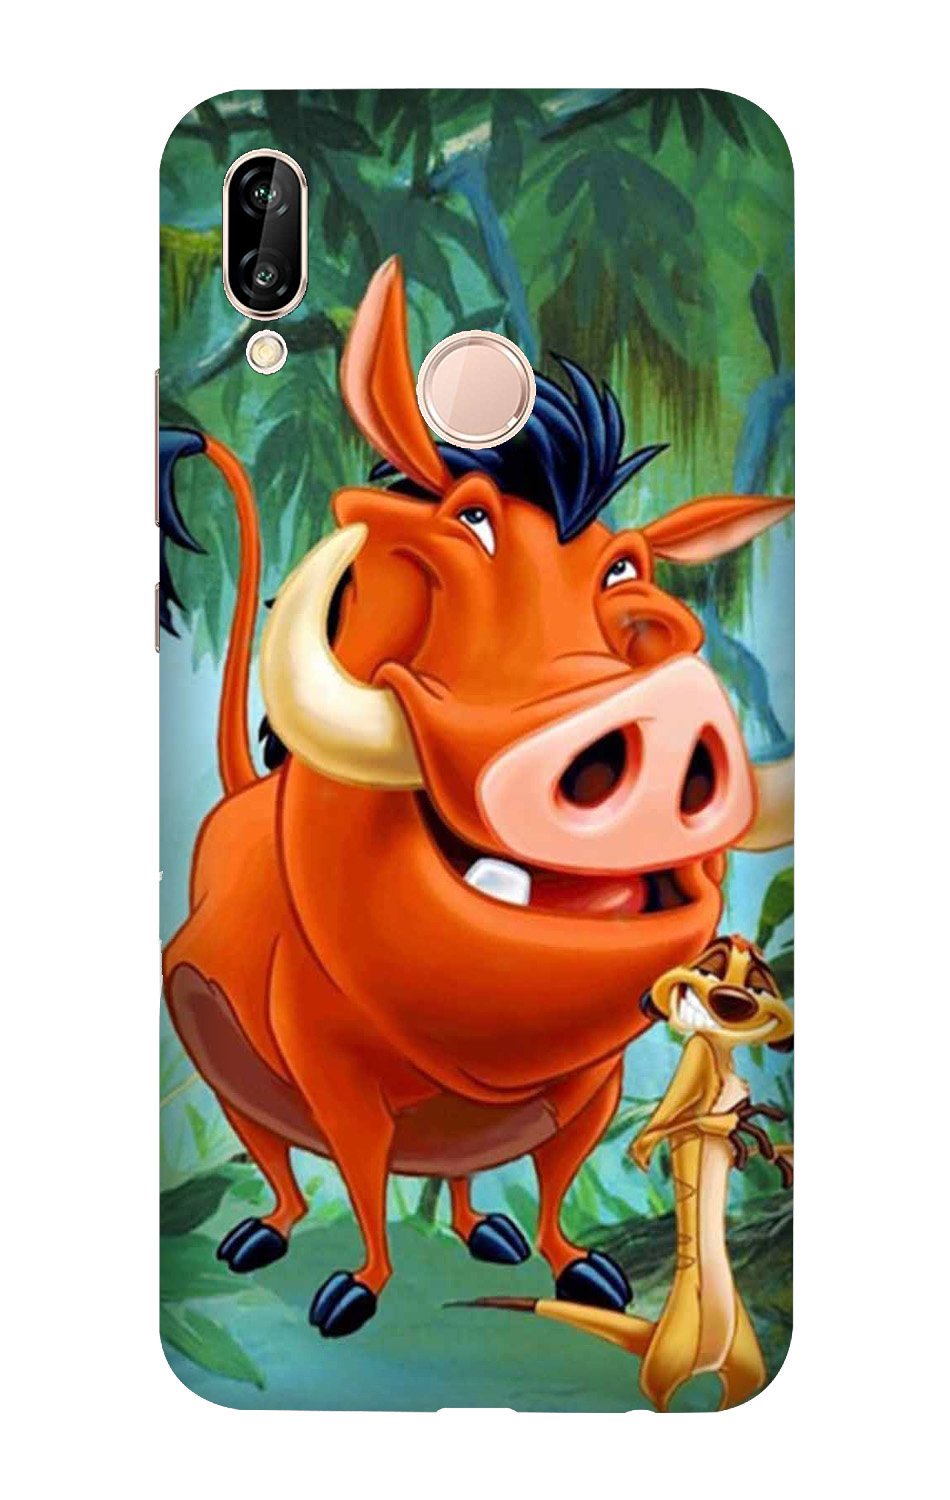 Timon and Pumbaa Mobile Back Case for Xiaomi Redmi Note 7S (Design - 305)